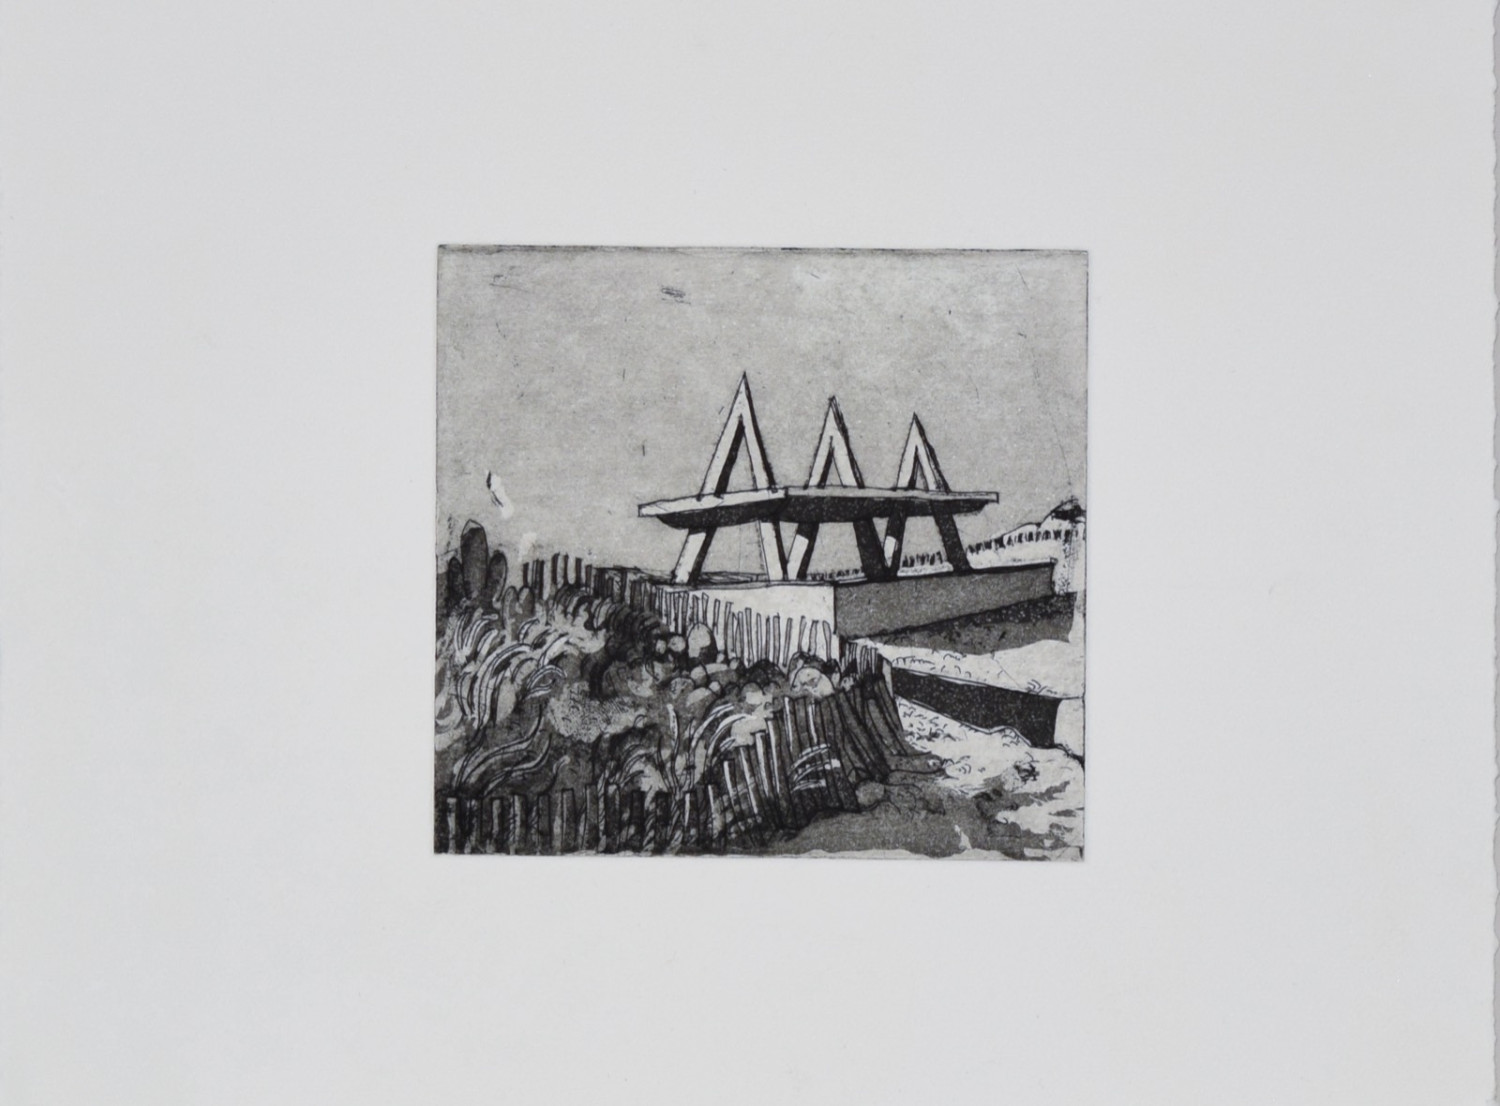 *Pavilion and Dunes (The ‘A’s)*, copperplate aquatint print, 10 x 10cm